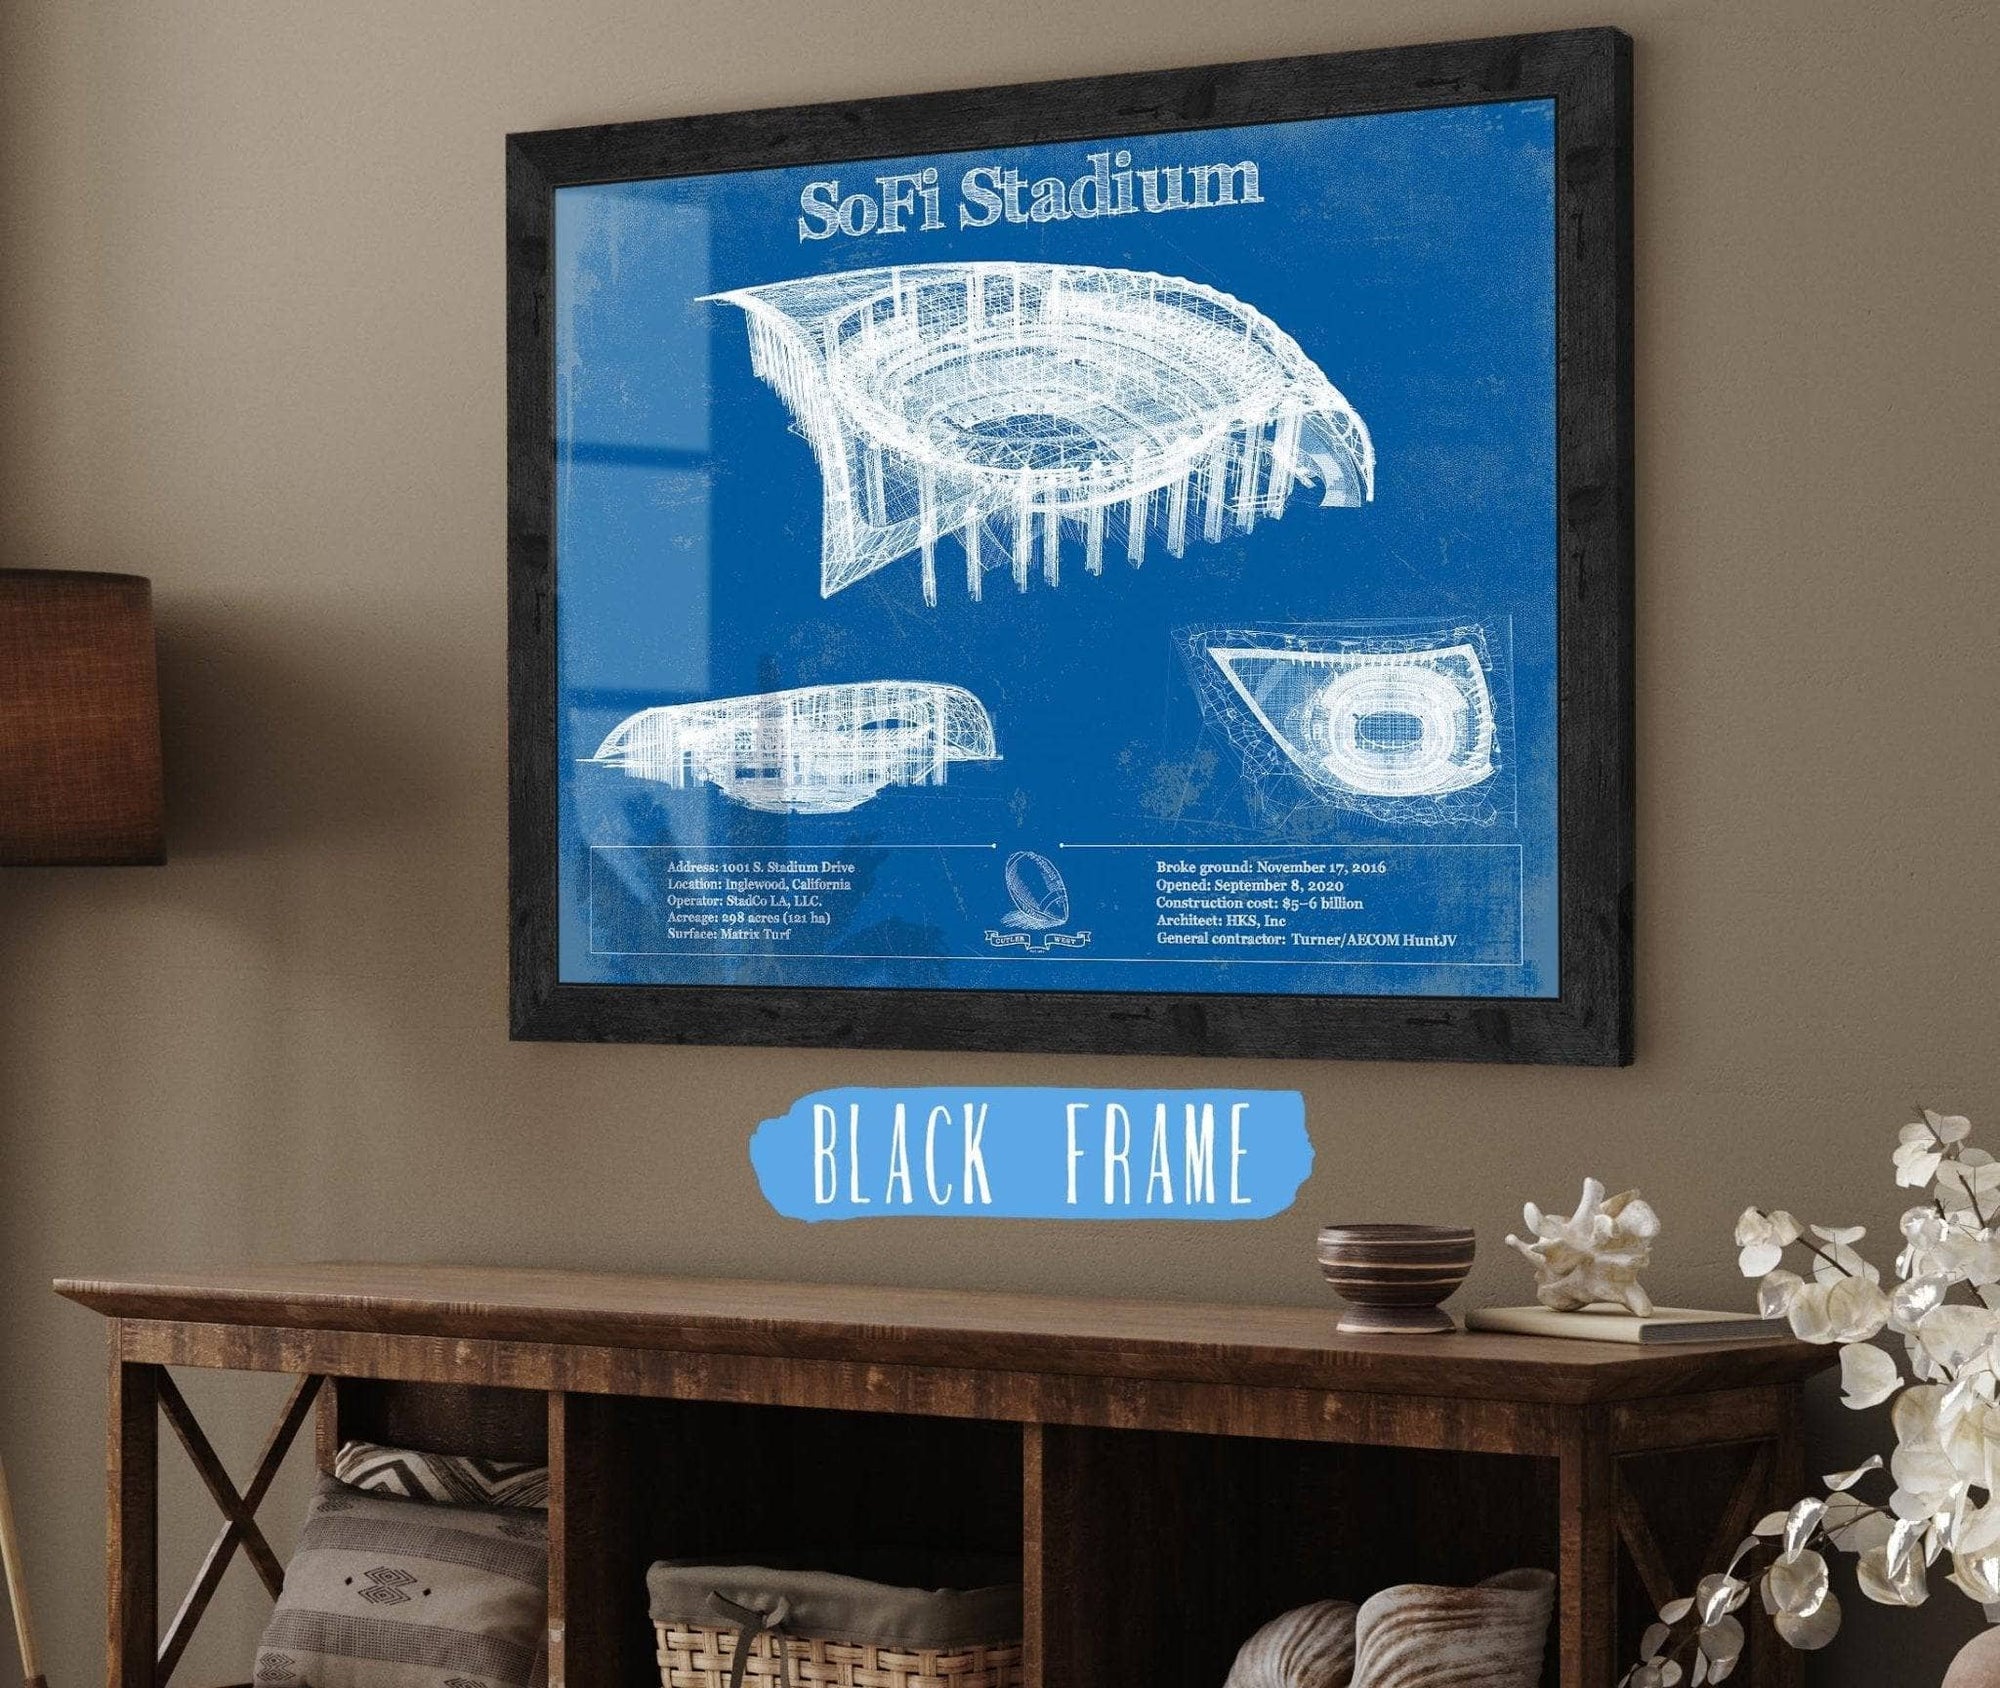 Cutler West Pro Football Collection 14" x 11" / Black Frame Los Angeles Chargers - SoFi Stadium Vintage Football Print 933311013_24005